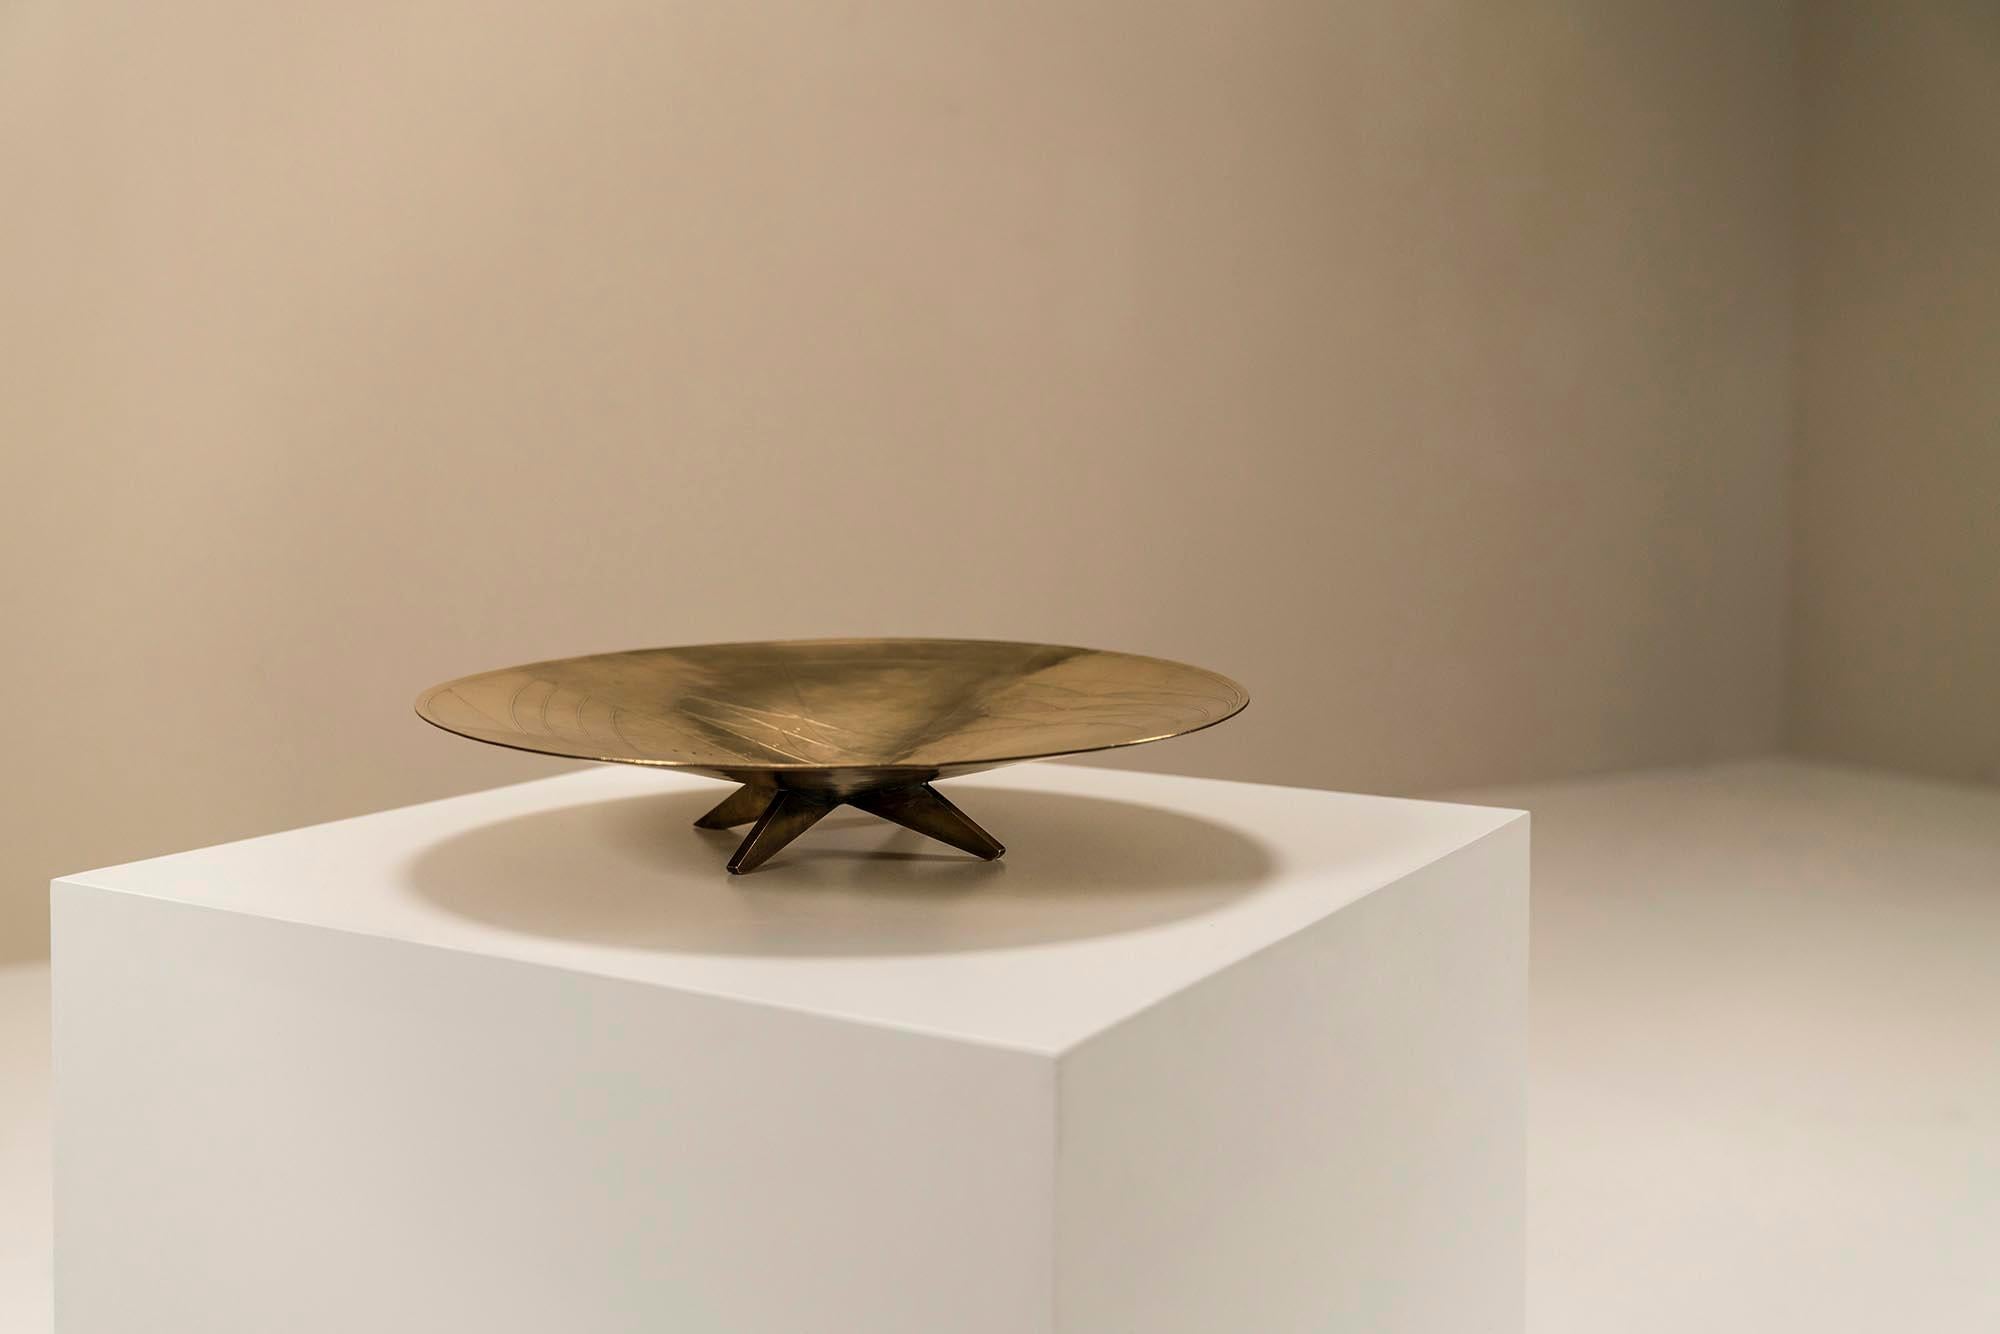 In addition to the beautiful table lamp that we present during the PAN, we also have an object from the hand of sculptor and decorative artist Cris Agterberg. This abstractly decorated bowl is made entirely of brass and has the unusual qualities